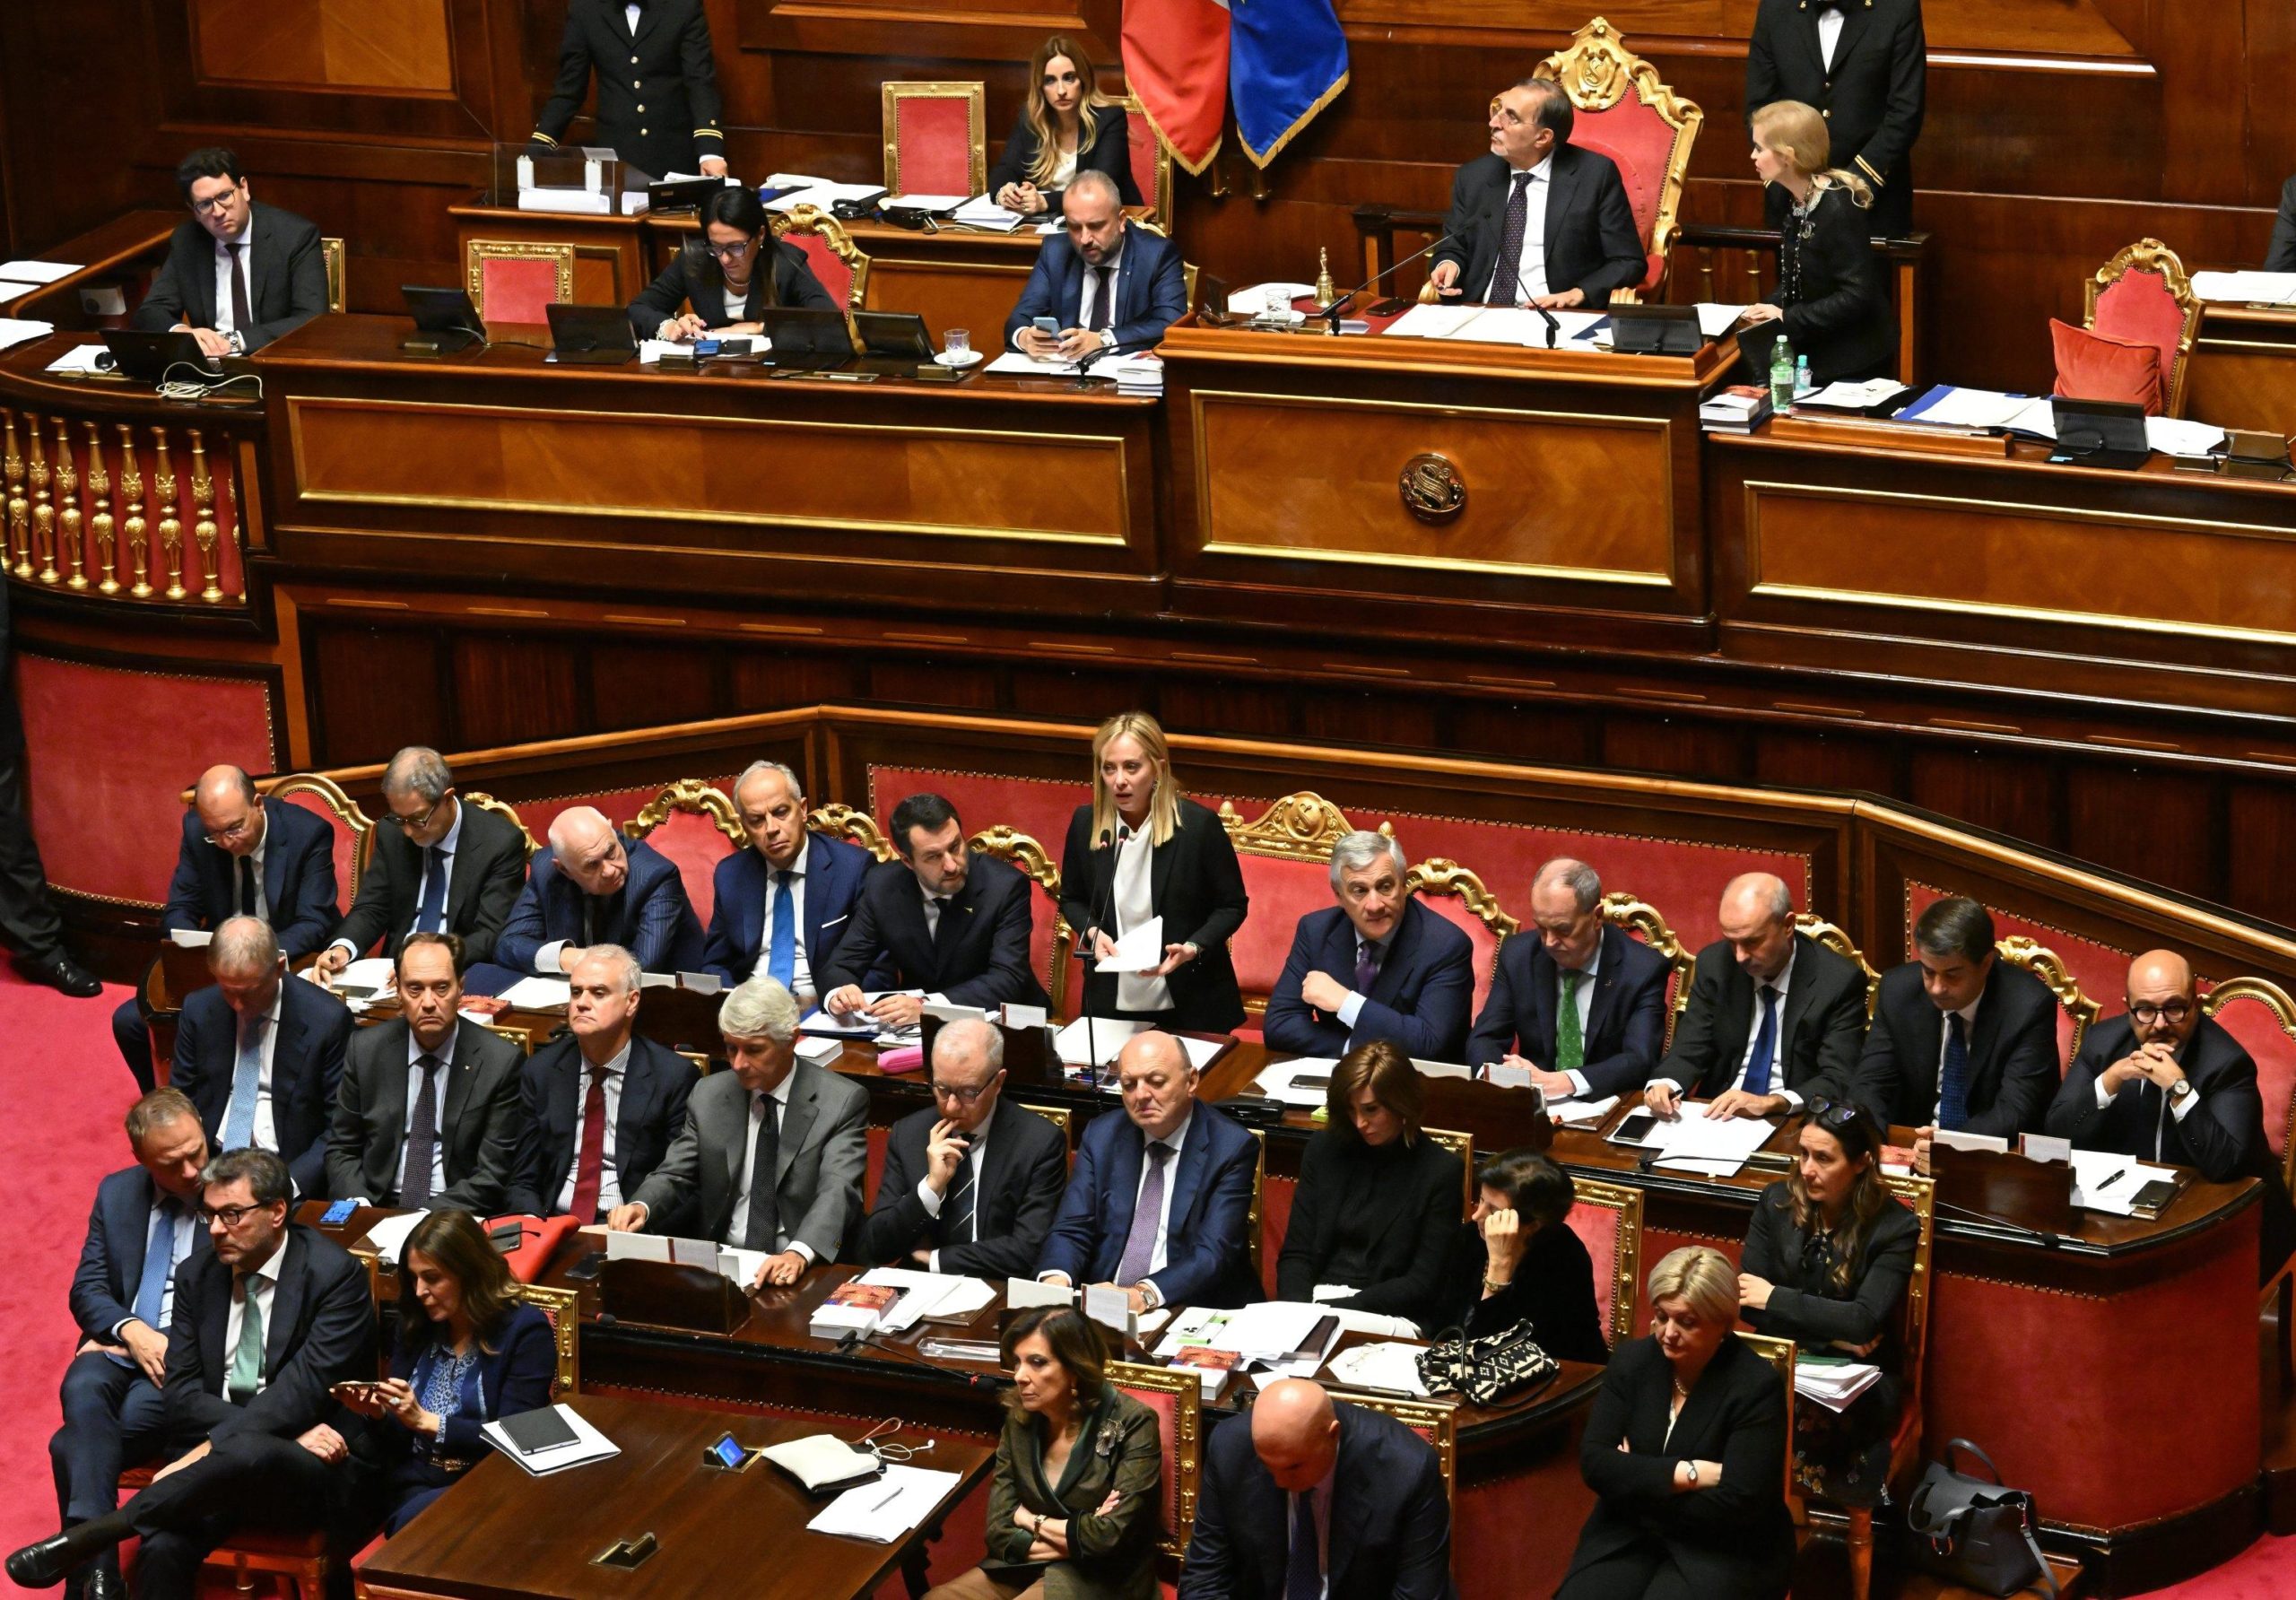 Italian Prime Minister, Giorgia Meloni, during her speech prior to the start of a confidence vote for the new government at the Italy's Senate, Rome, 26 October 2022. 
ANSA/CLAUDIO PERI